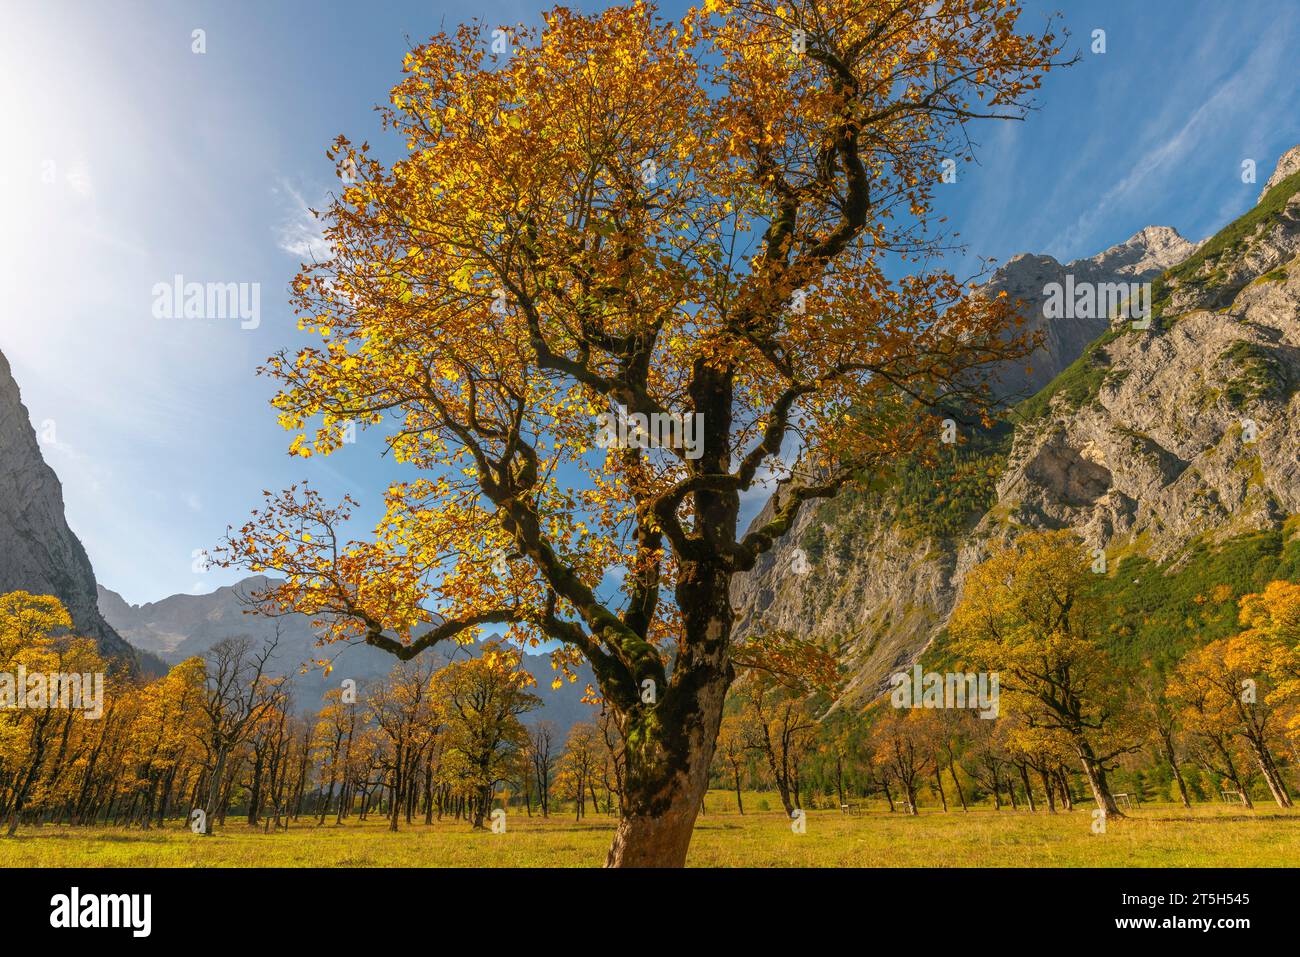 Colorful fall foilage in the Ahorn Boden, Maple Ground, Engtal or Eng Valley,  nature reserve Karwendel Massif, the Alps, Tyrol, Austria, Stock Photo